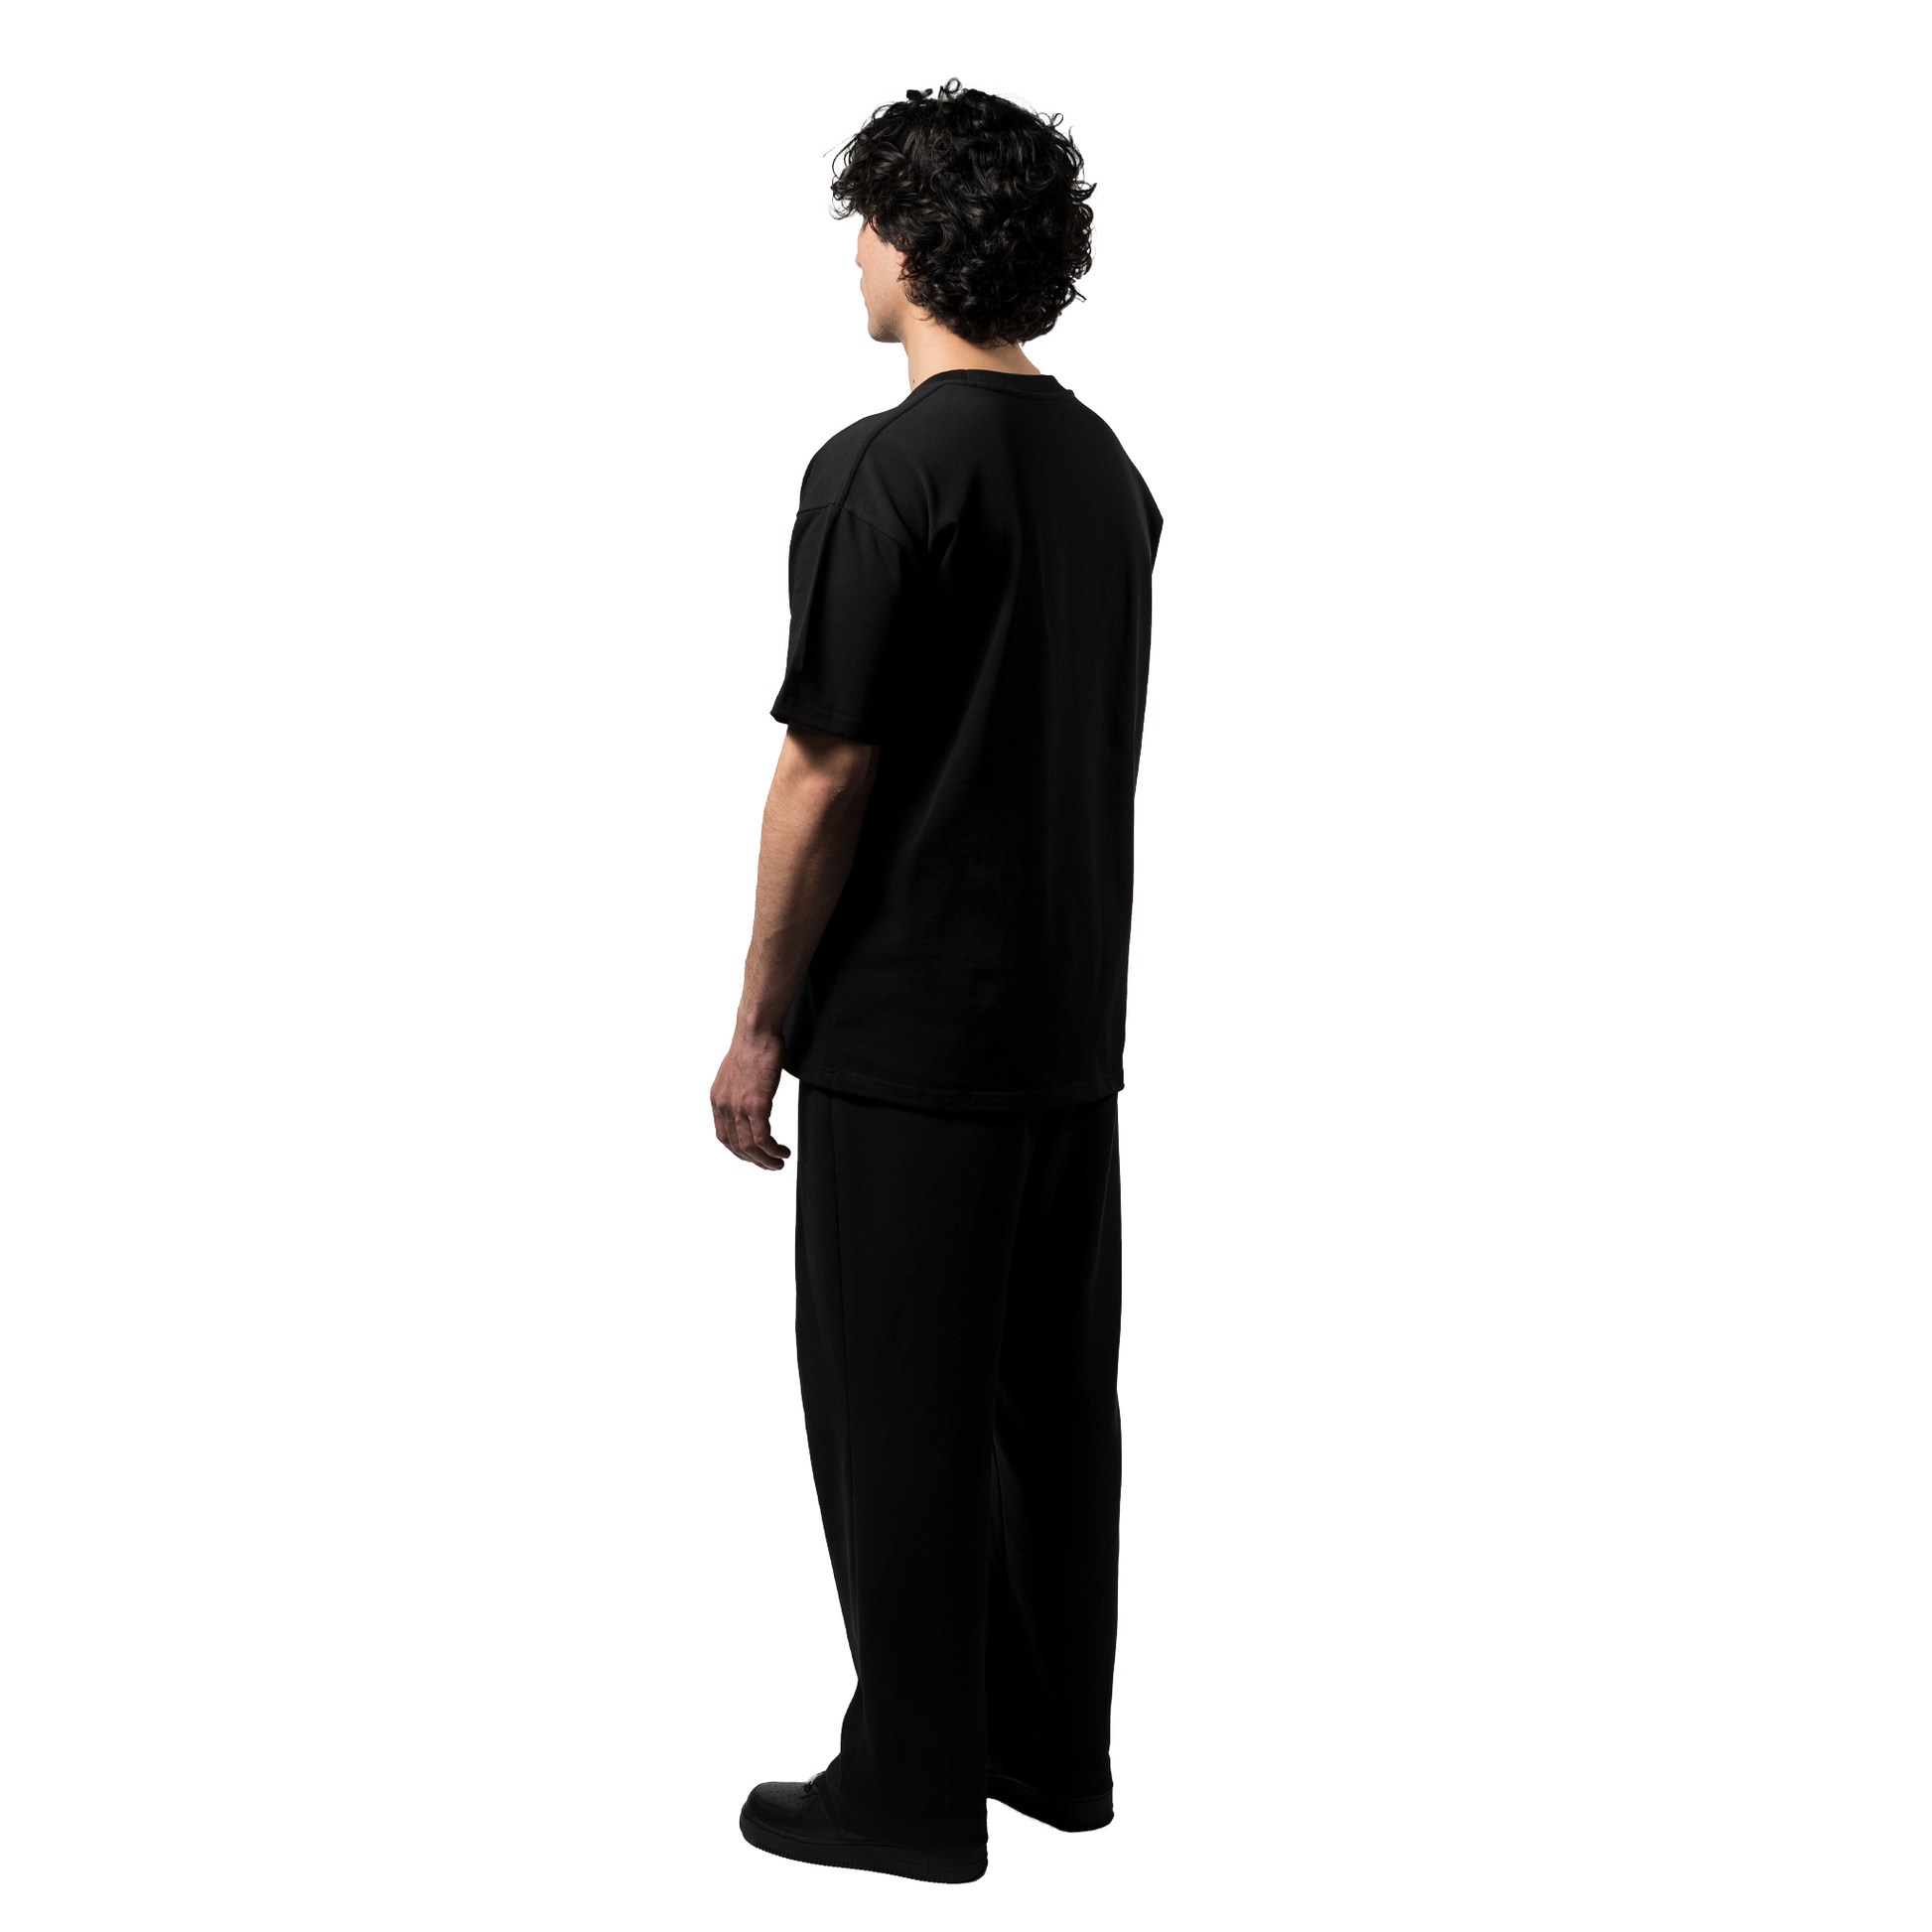 A model, showcases an elegant black T-shirt with the white brand name FRIEDENMEER across the chest, paired with matching black trousers and shoes, highlighting the brand's sleek elegance and luxury.